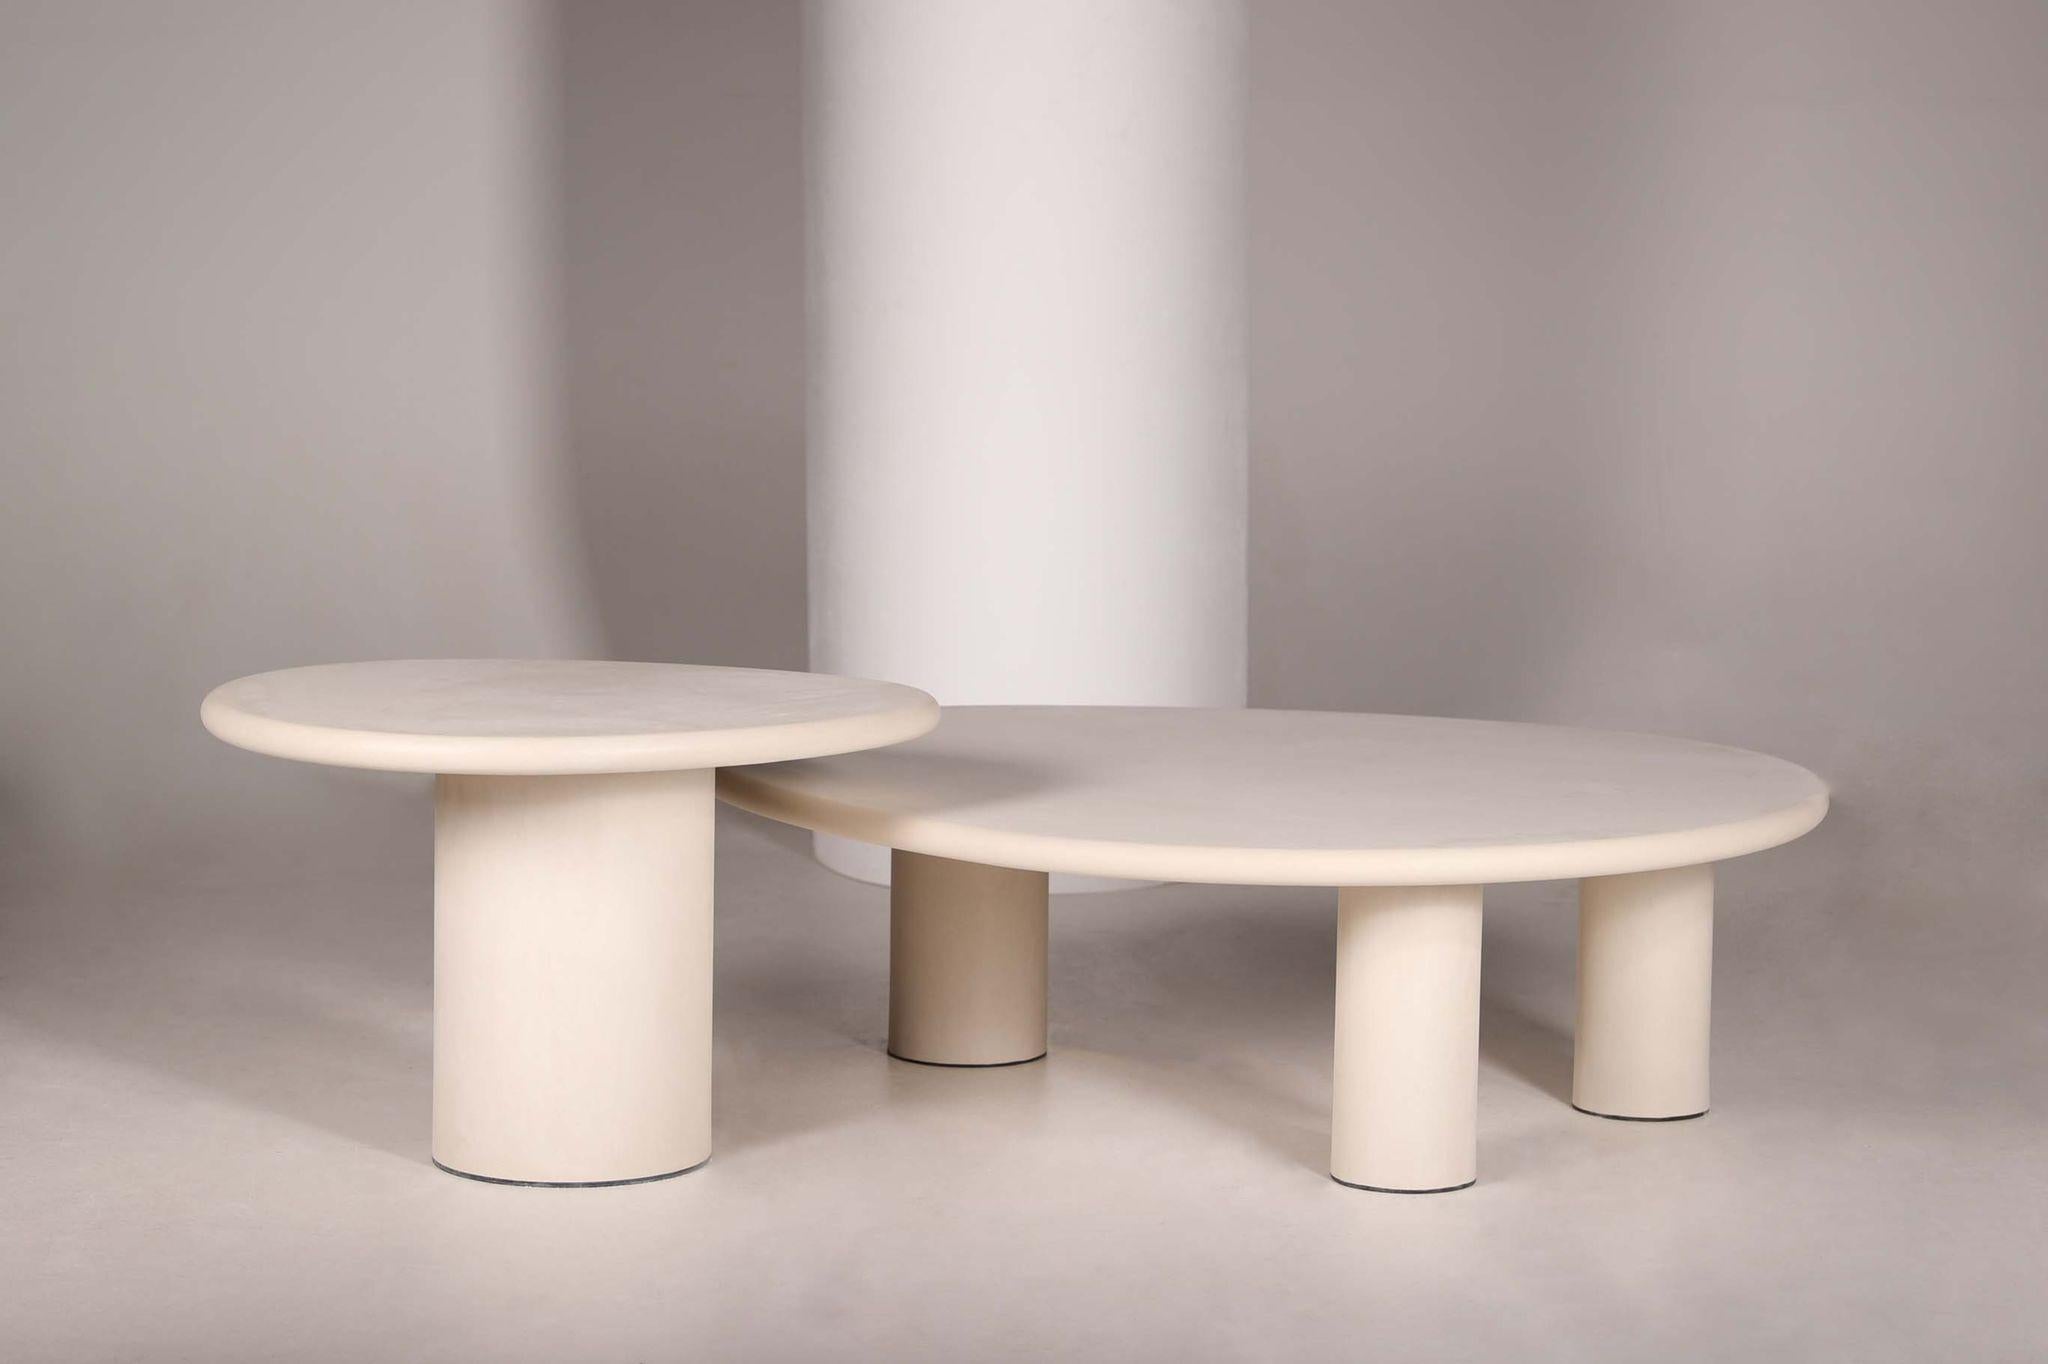 Handmade outdoor Rock-Shaped Natural Plaster Table Set by Philippe Colette
Dimensions: 
80 x 76 x 50, Foot Ø 30 cm
130 x 110 x 38, Foot Ø 20 cm 
Materials: Mineral lime plaster.

Our tables are in mineral lime plaster, unlike mortex, they are